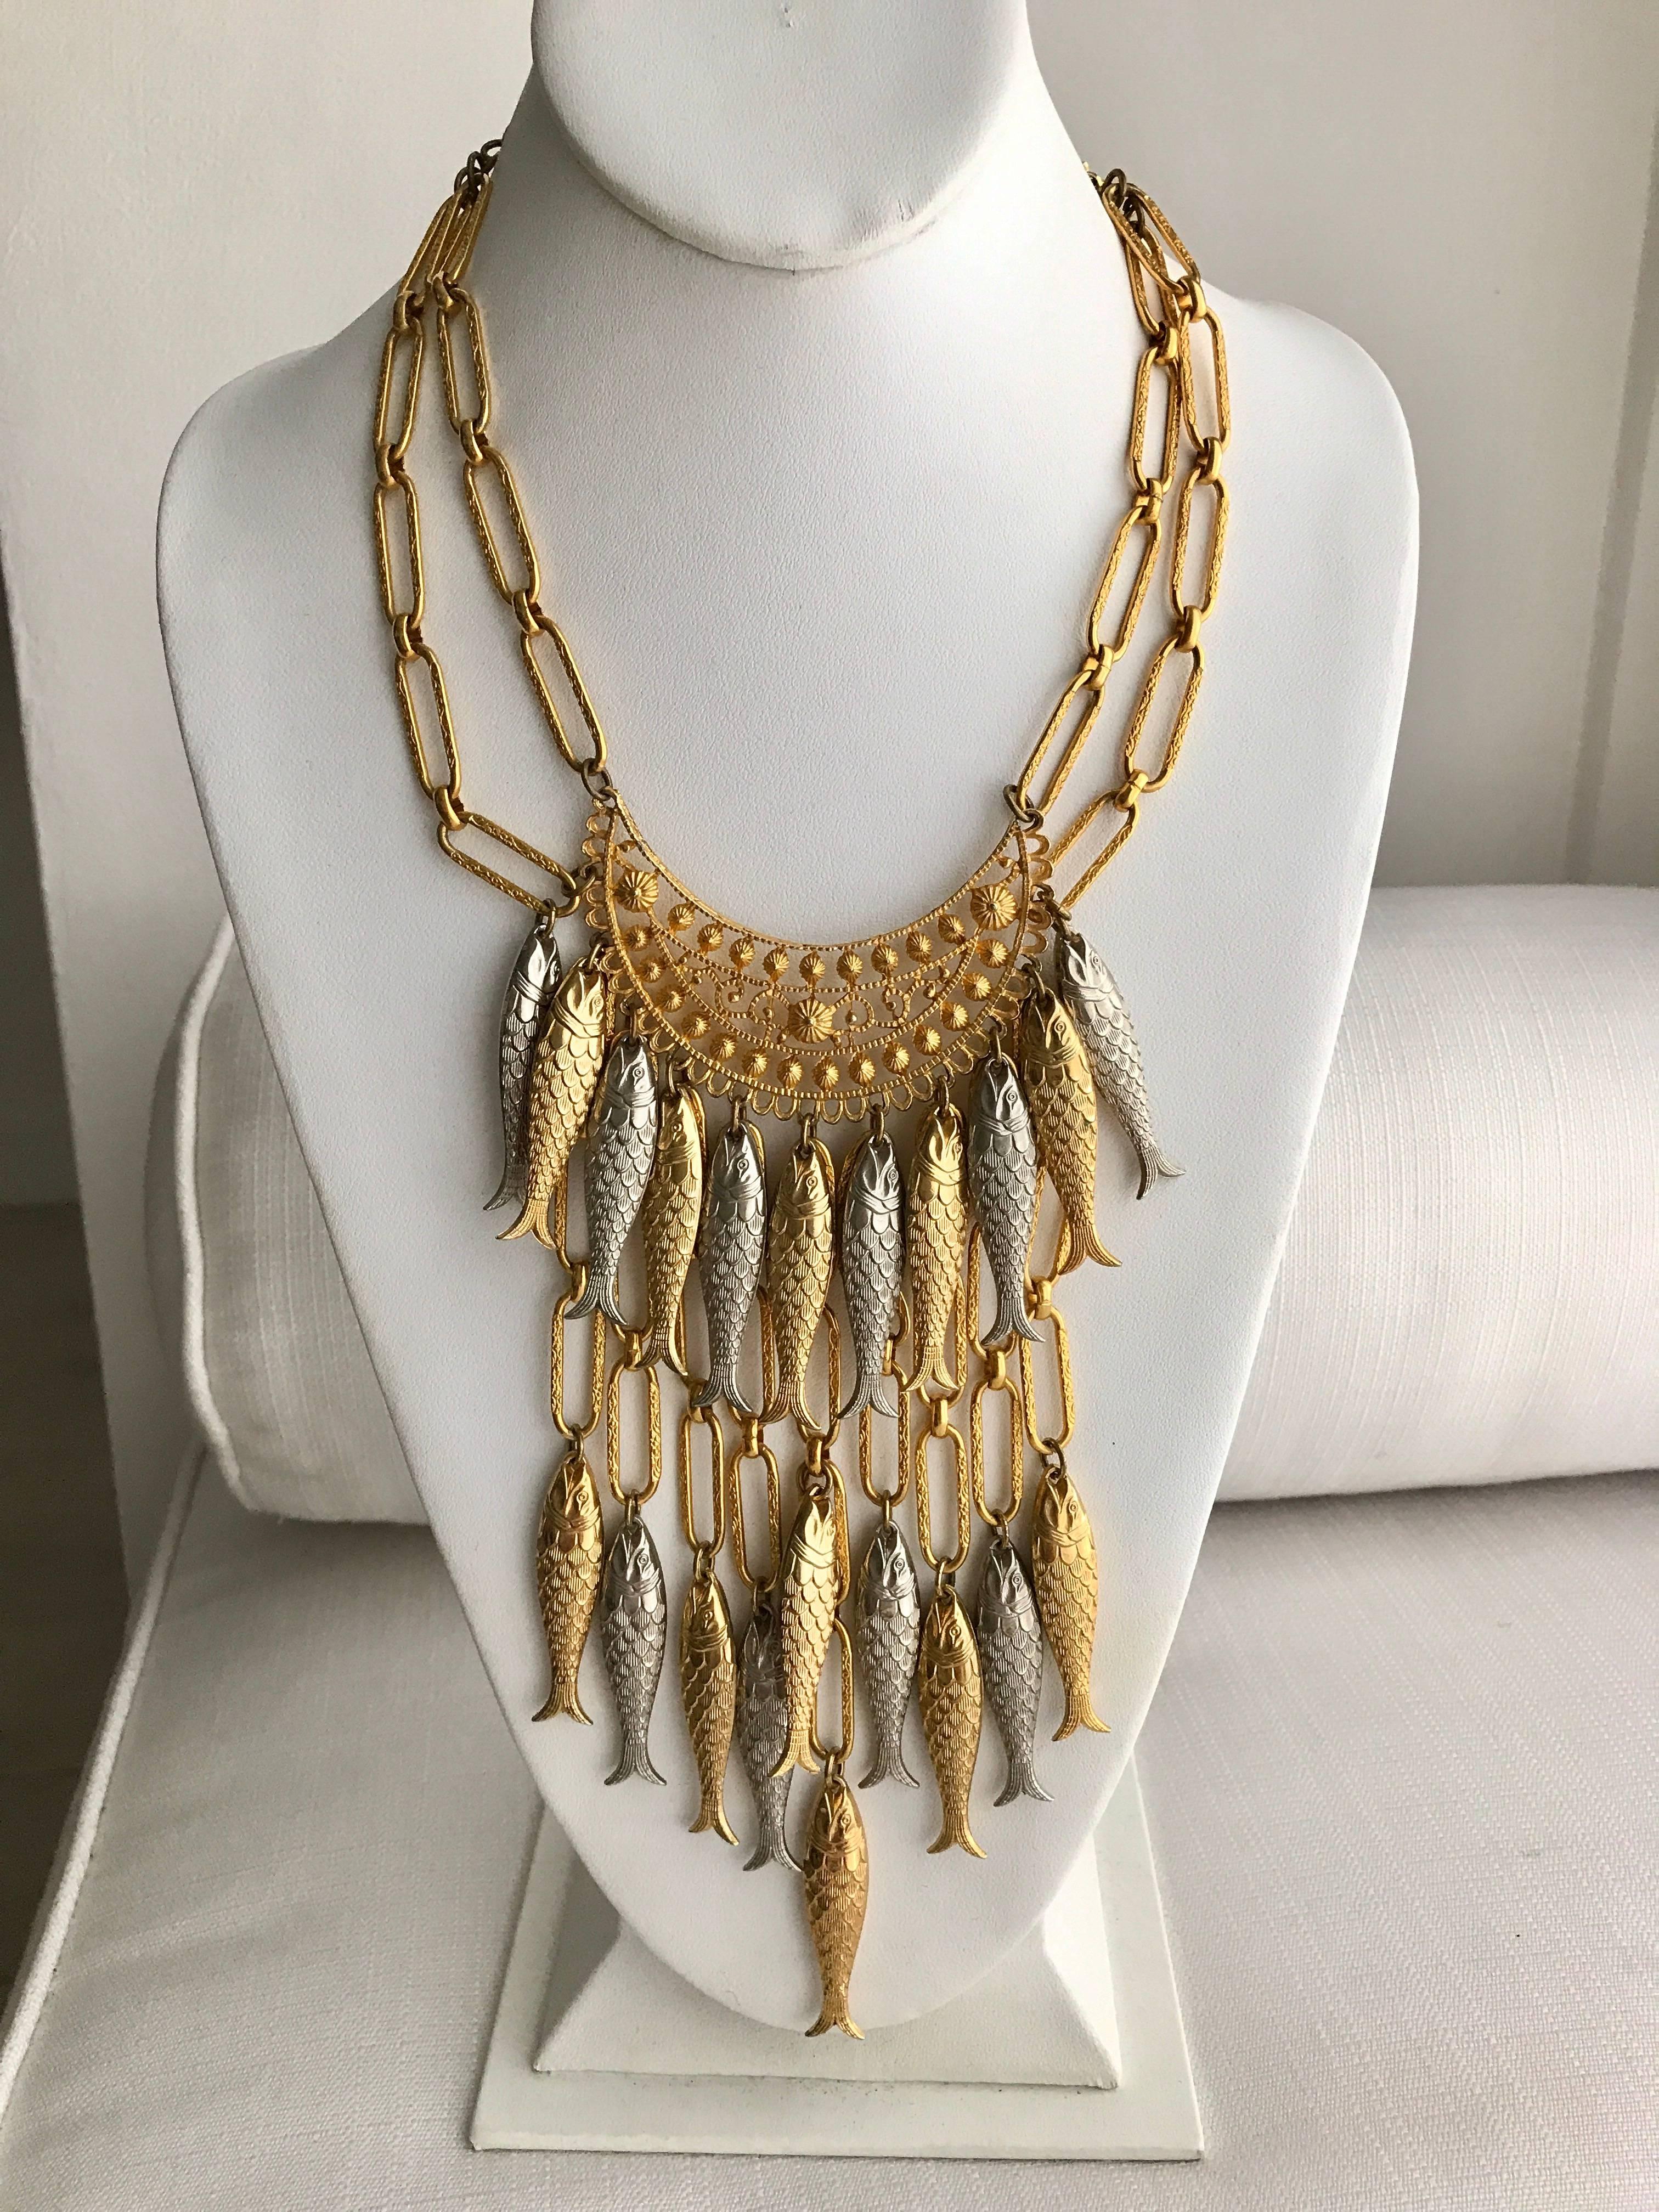 Vintage 1970s Gold and Silver Fish metal bib necklace with clip on earring set.
Note: This is not a real gold or real silver, This is a costume jewelry.

Diameter neck : 15.5 inch ( hook is adjustable_
Pendant drop up to : 7 inch  / size of the fish